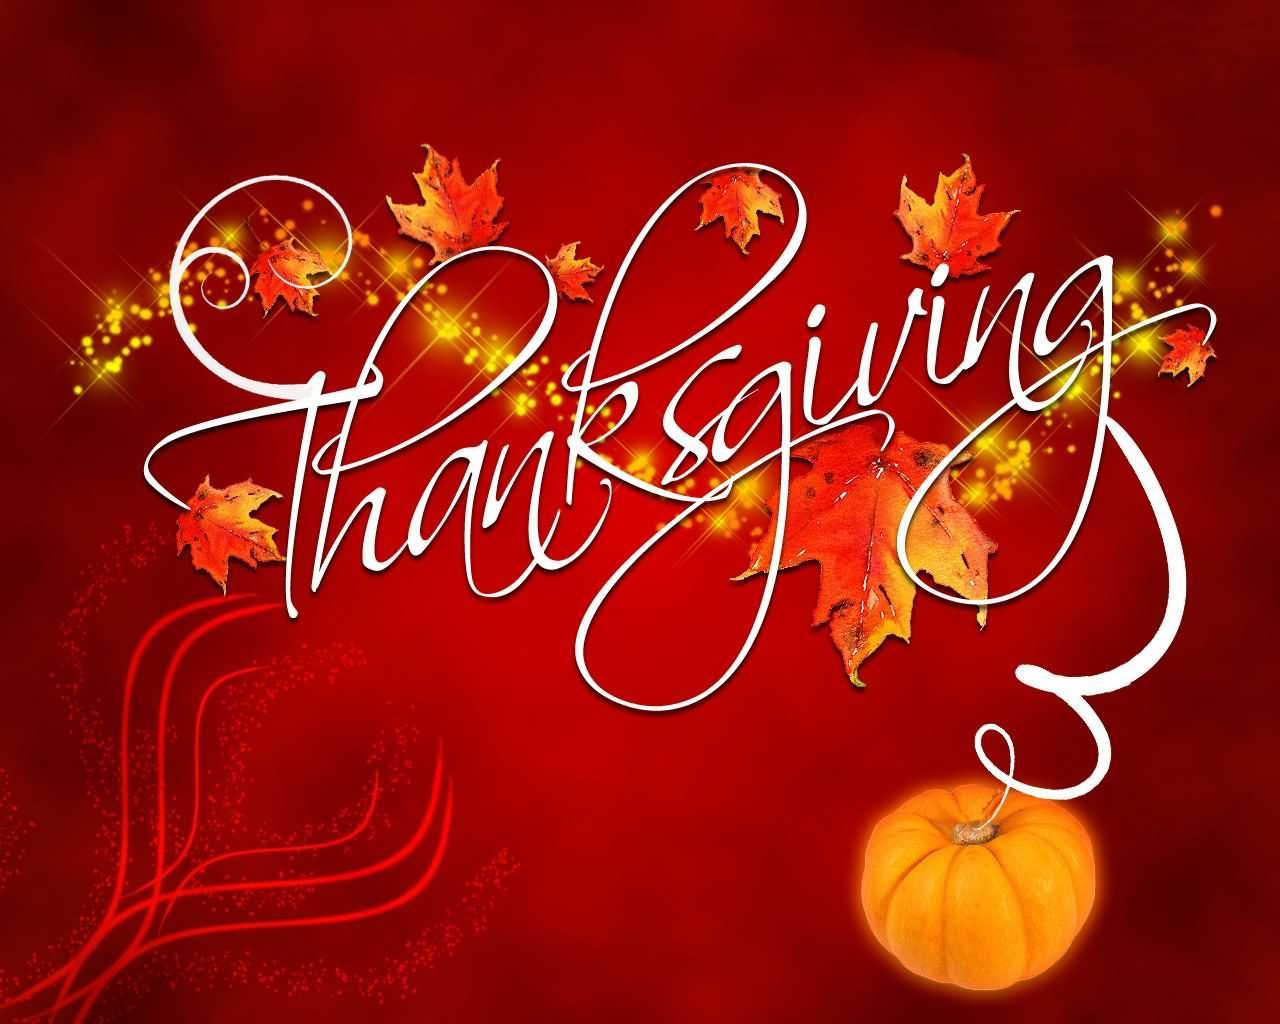 happy thanksgiving wishes Large Image. Thanksgiving picture, Thanksgiving image, Free thanksgiving wallpaper